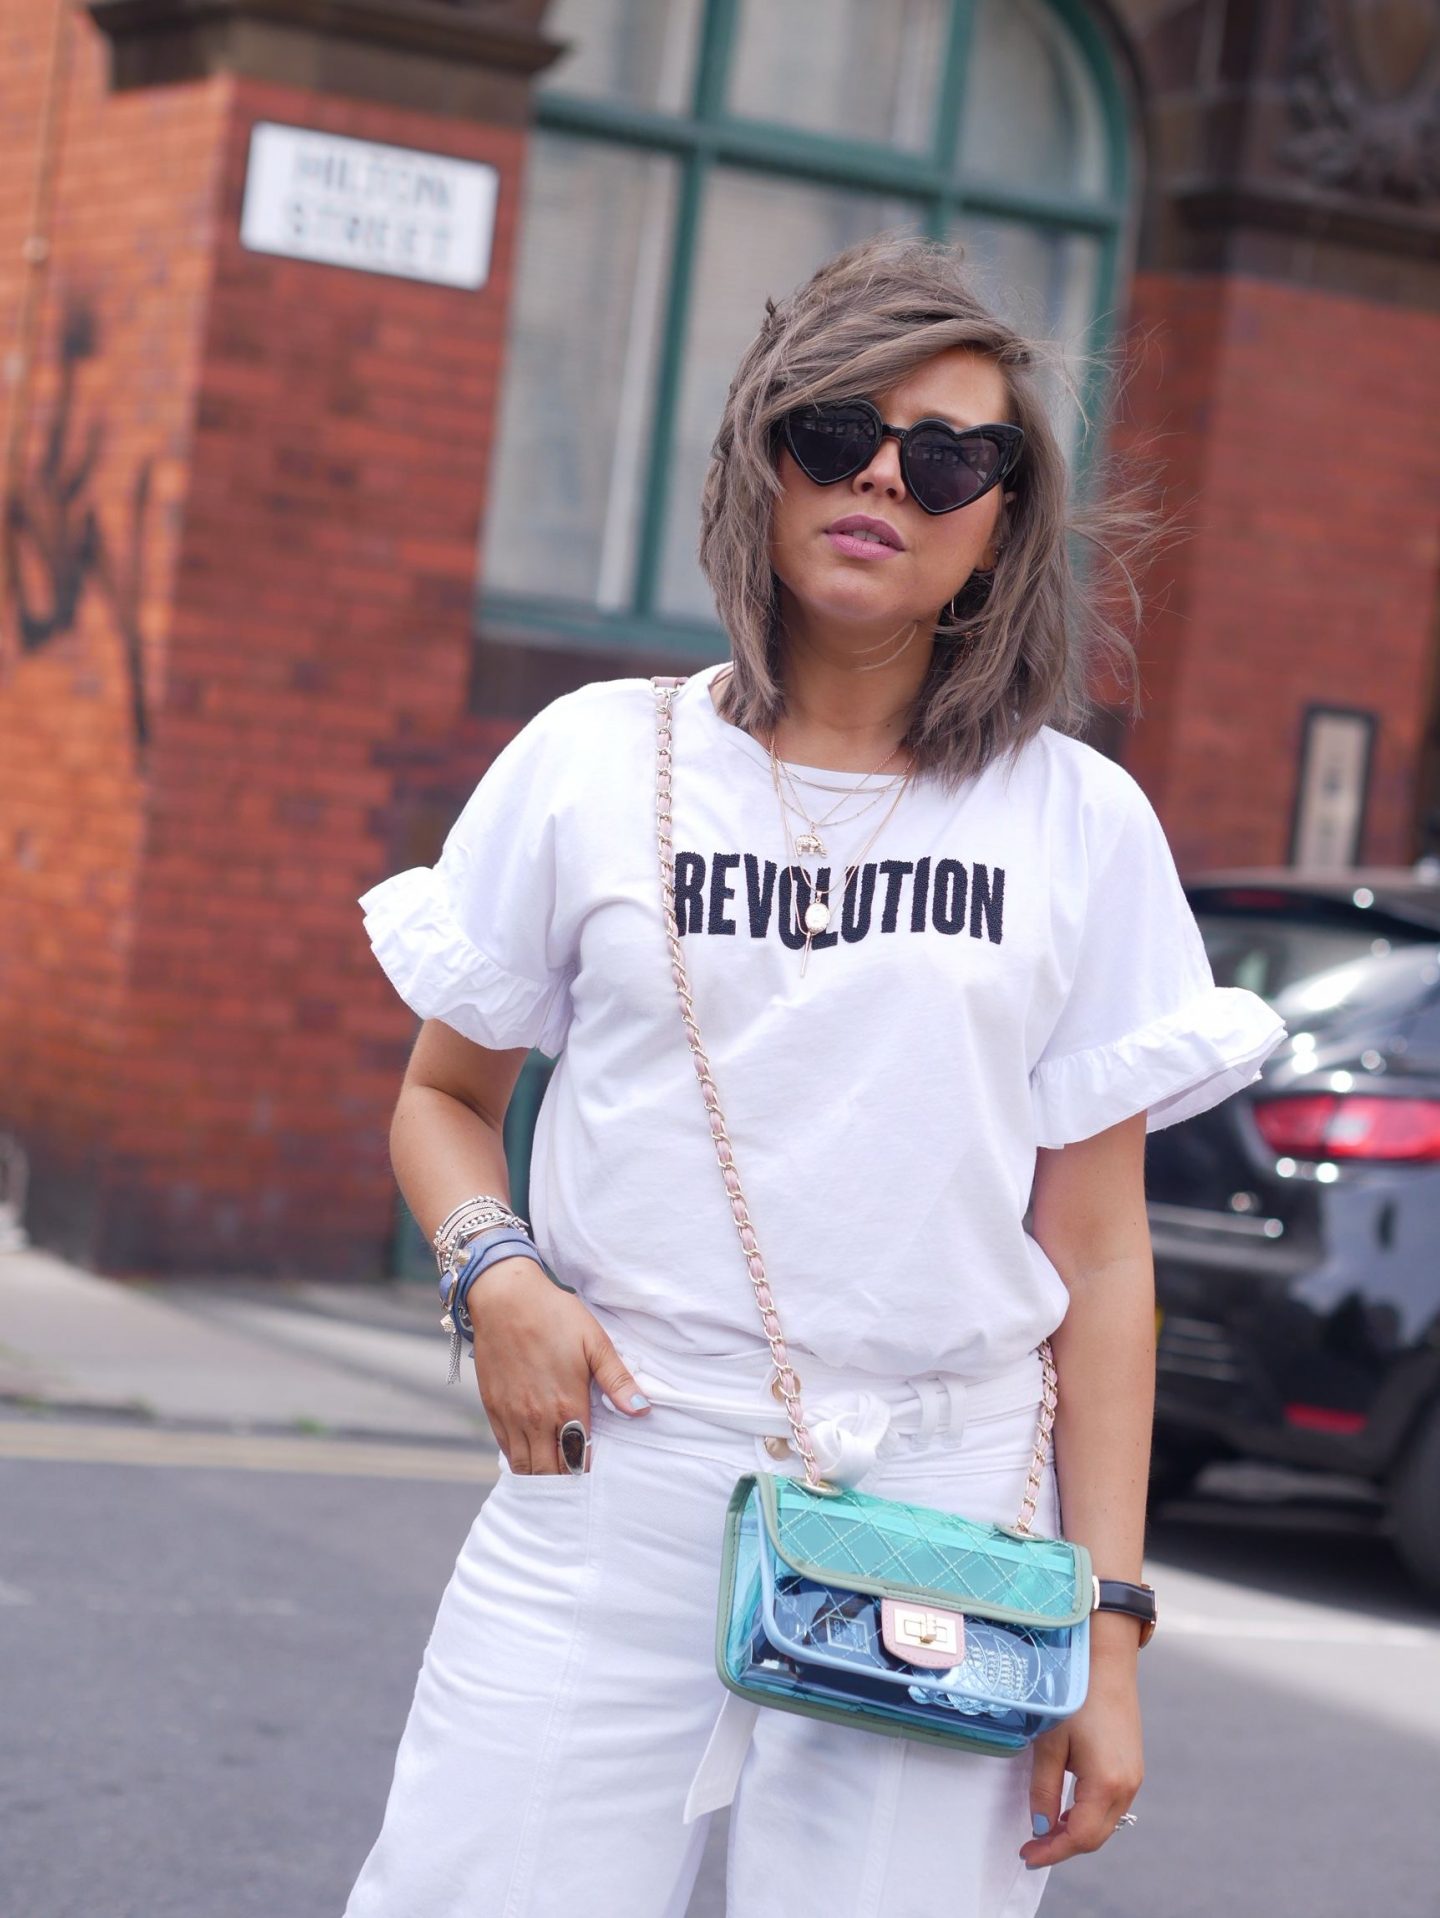 manchester blogger, manchester fashion blogger, outfit of the day, street style, beauty blogger 